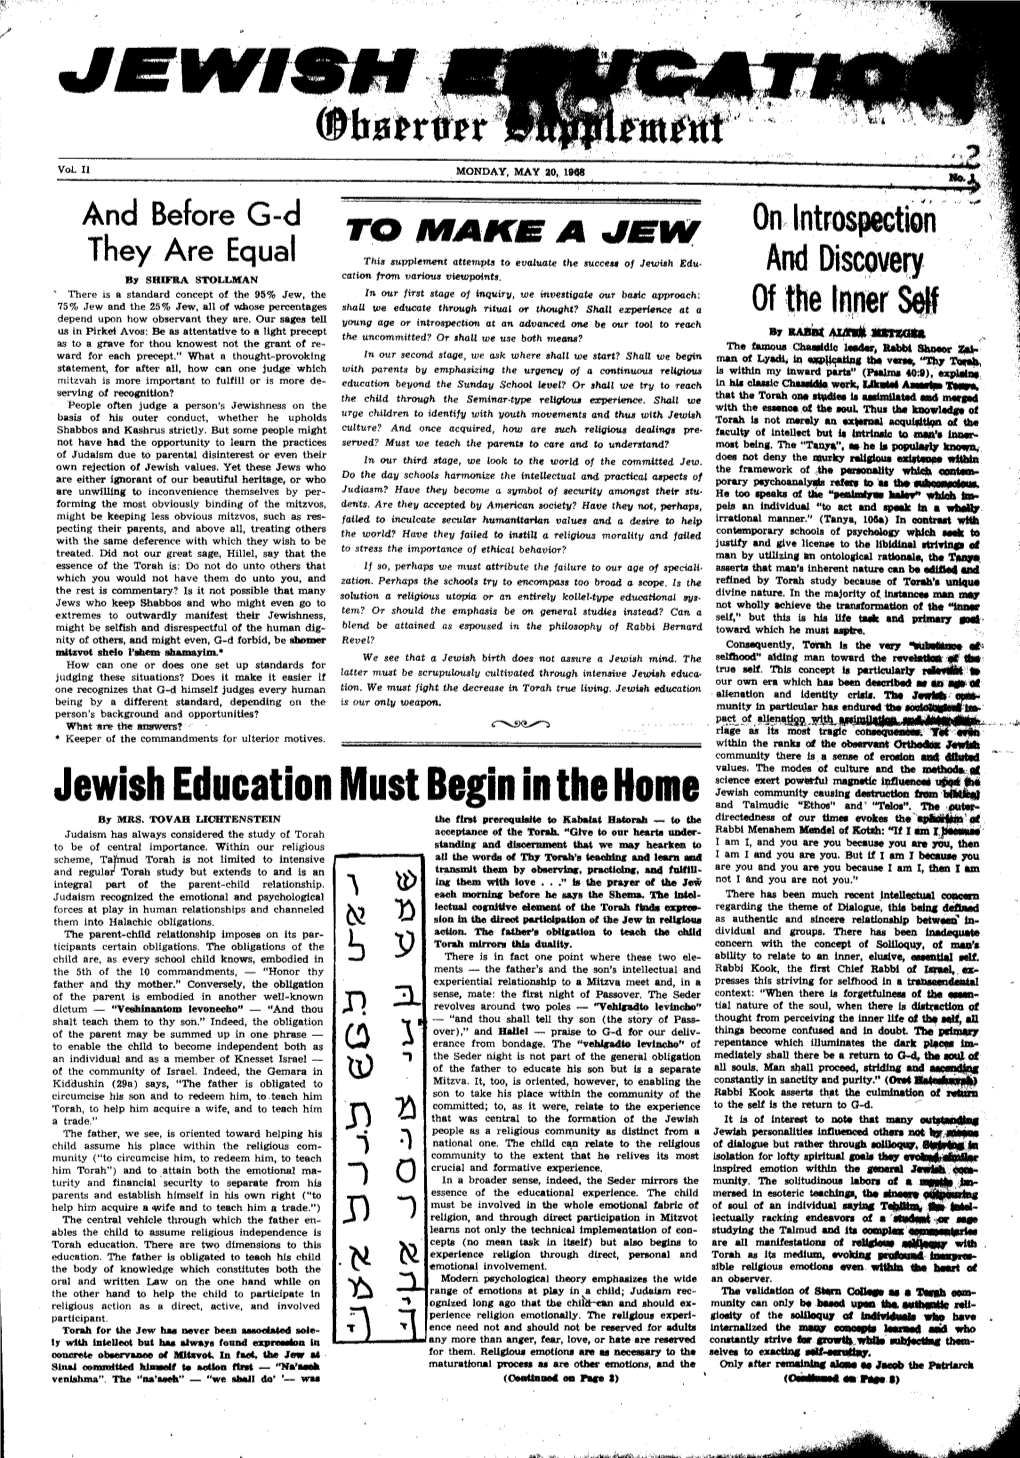 Jewish Education Must Begin in the Honie by MRS, TOVAH LIOBTENSTEIN Ille Lint --To Kabala&